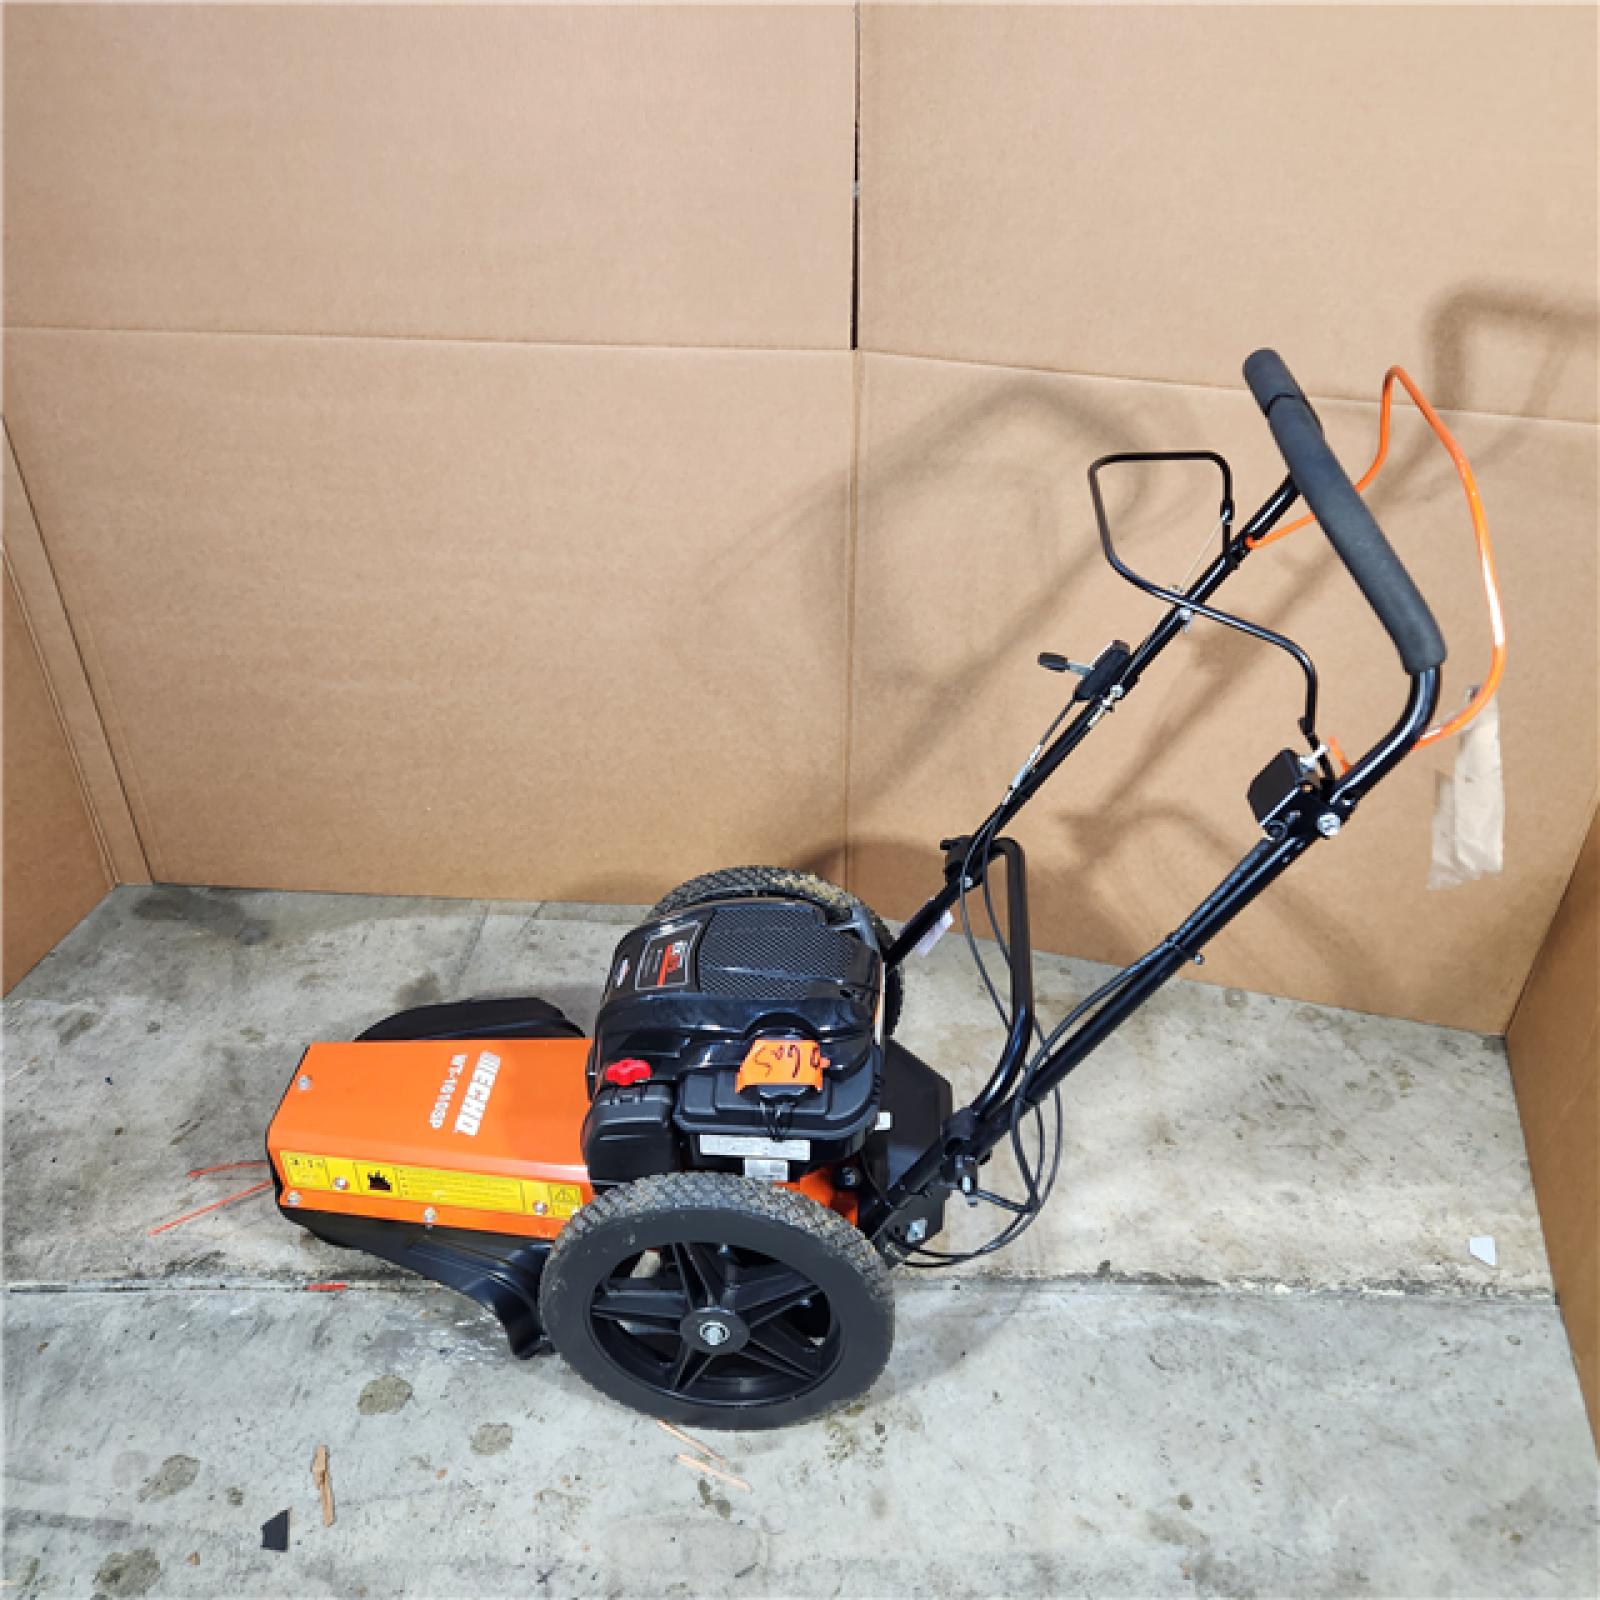 Houston Location - As-IS ECHO 24 in. 163 Cc Gas 4-Stroke Walk Behind Self-Propelled Wheeled Trimmer - Appears IN LIKE NEW Condition